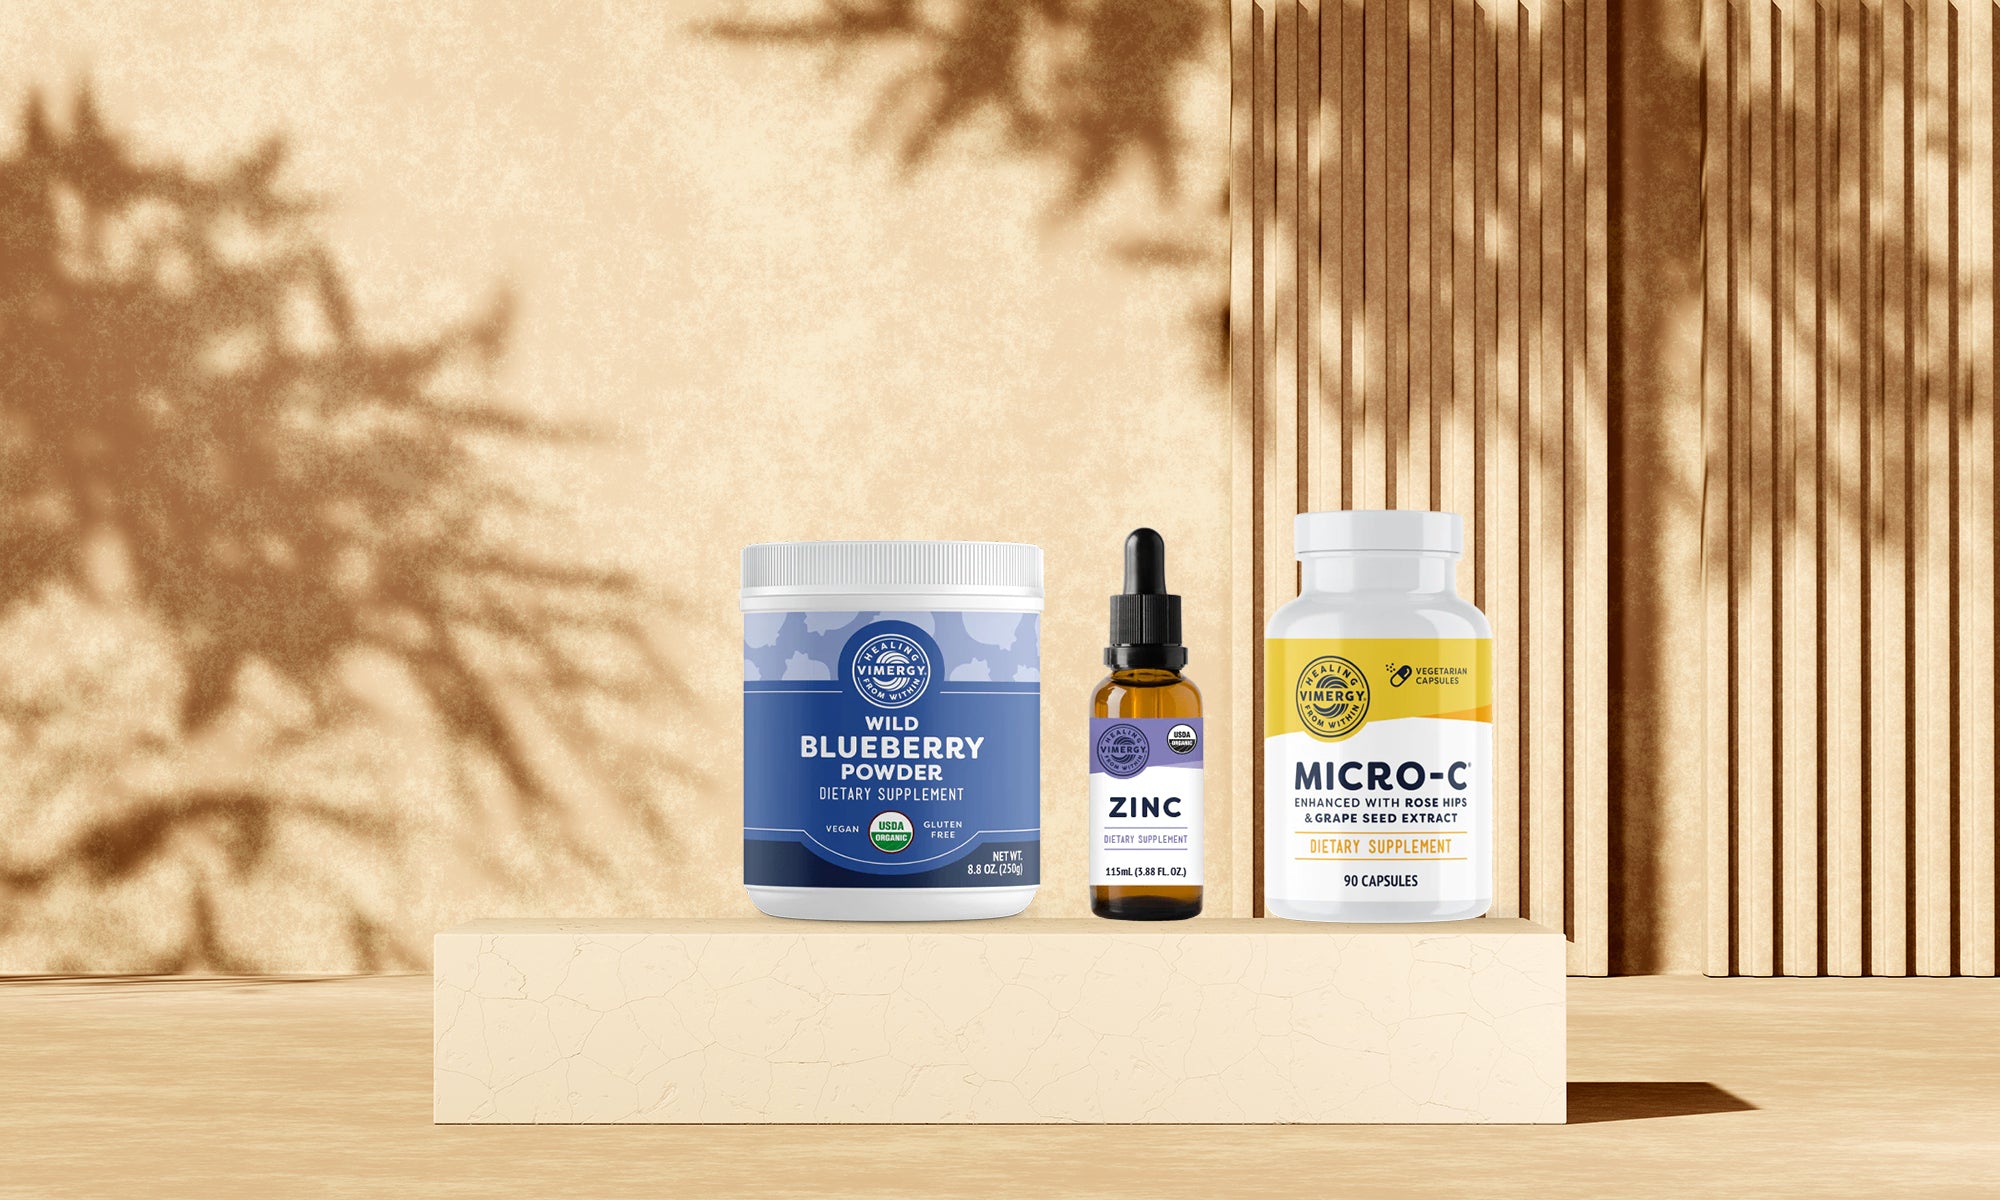 Vimergy: The Gold Standard of Wellness, Now in South Africa